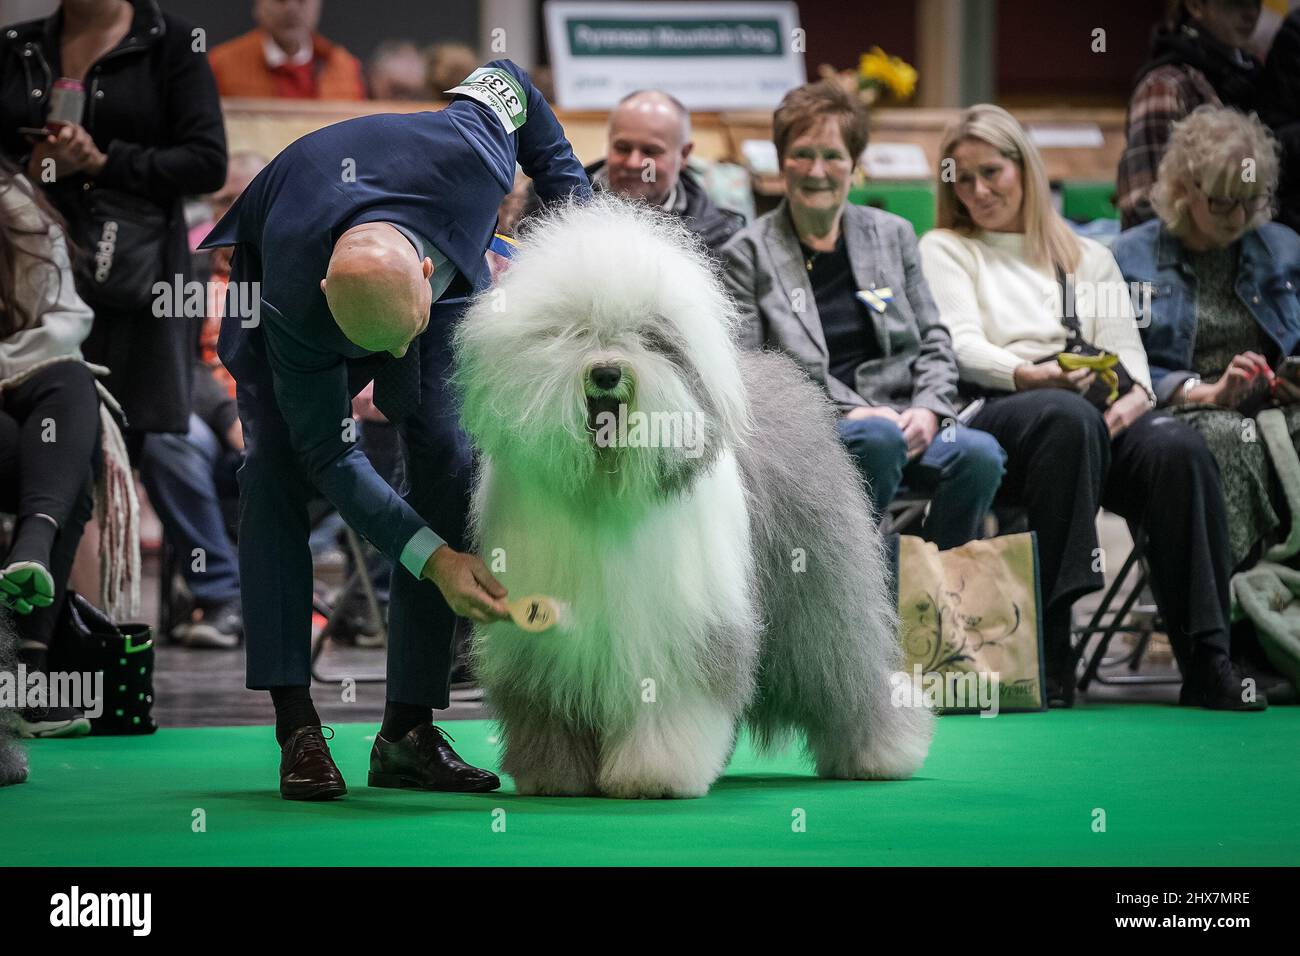 London, UK. 10th March 2022. Crufts 2022: Day 1 of the Crufts dog show at the NEC in Birmingham. Over 25,000 dogs and 166,000 fans will visit during the three day show before Best in Show is awarded on the final day. Dubbed the greatest dog event in the world, Crufts returns for 2022 after the competition was unable to go ahead last year. Credit: Guy Corbishley/Alamy Live News Stock Photo